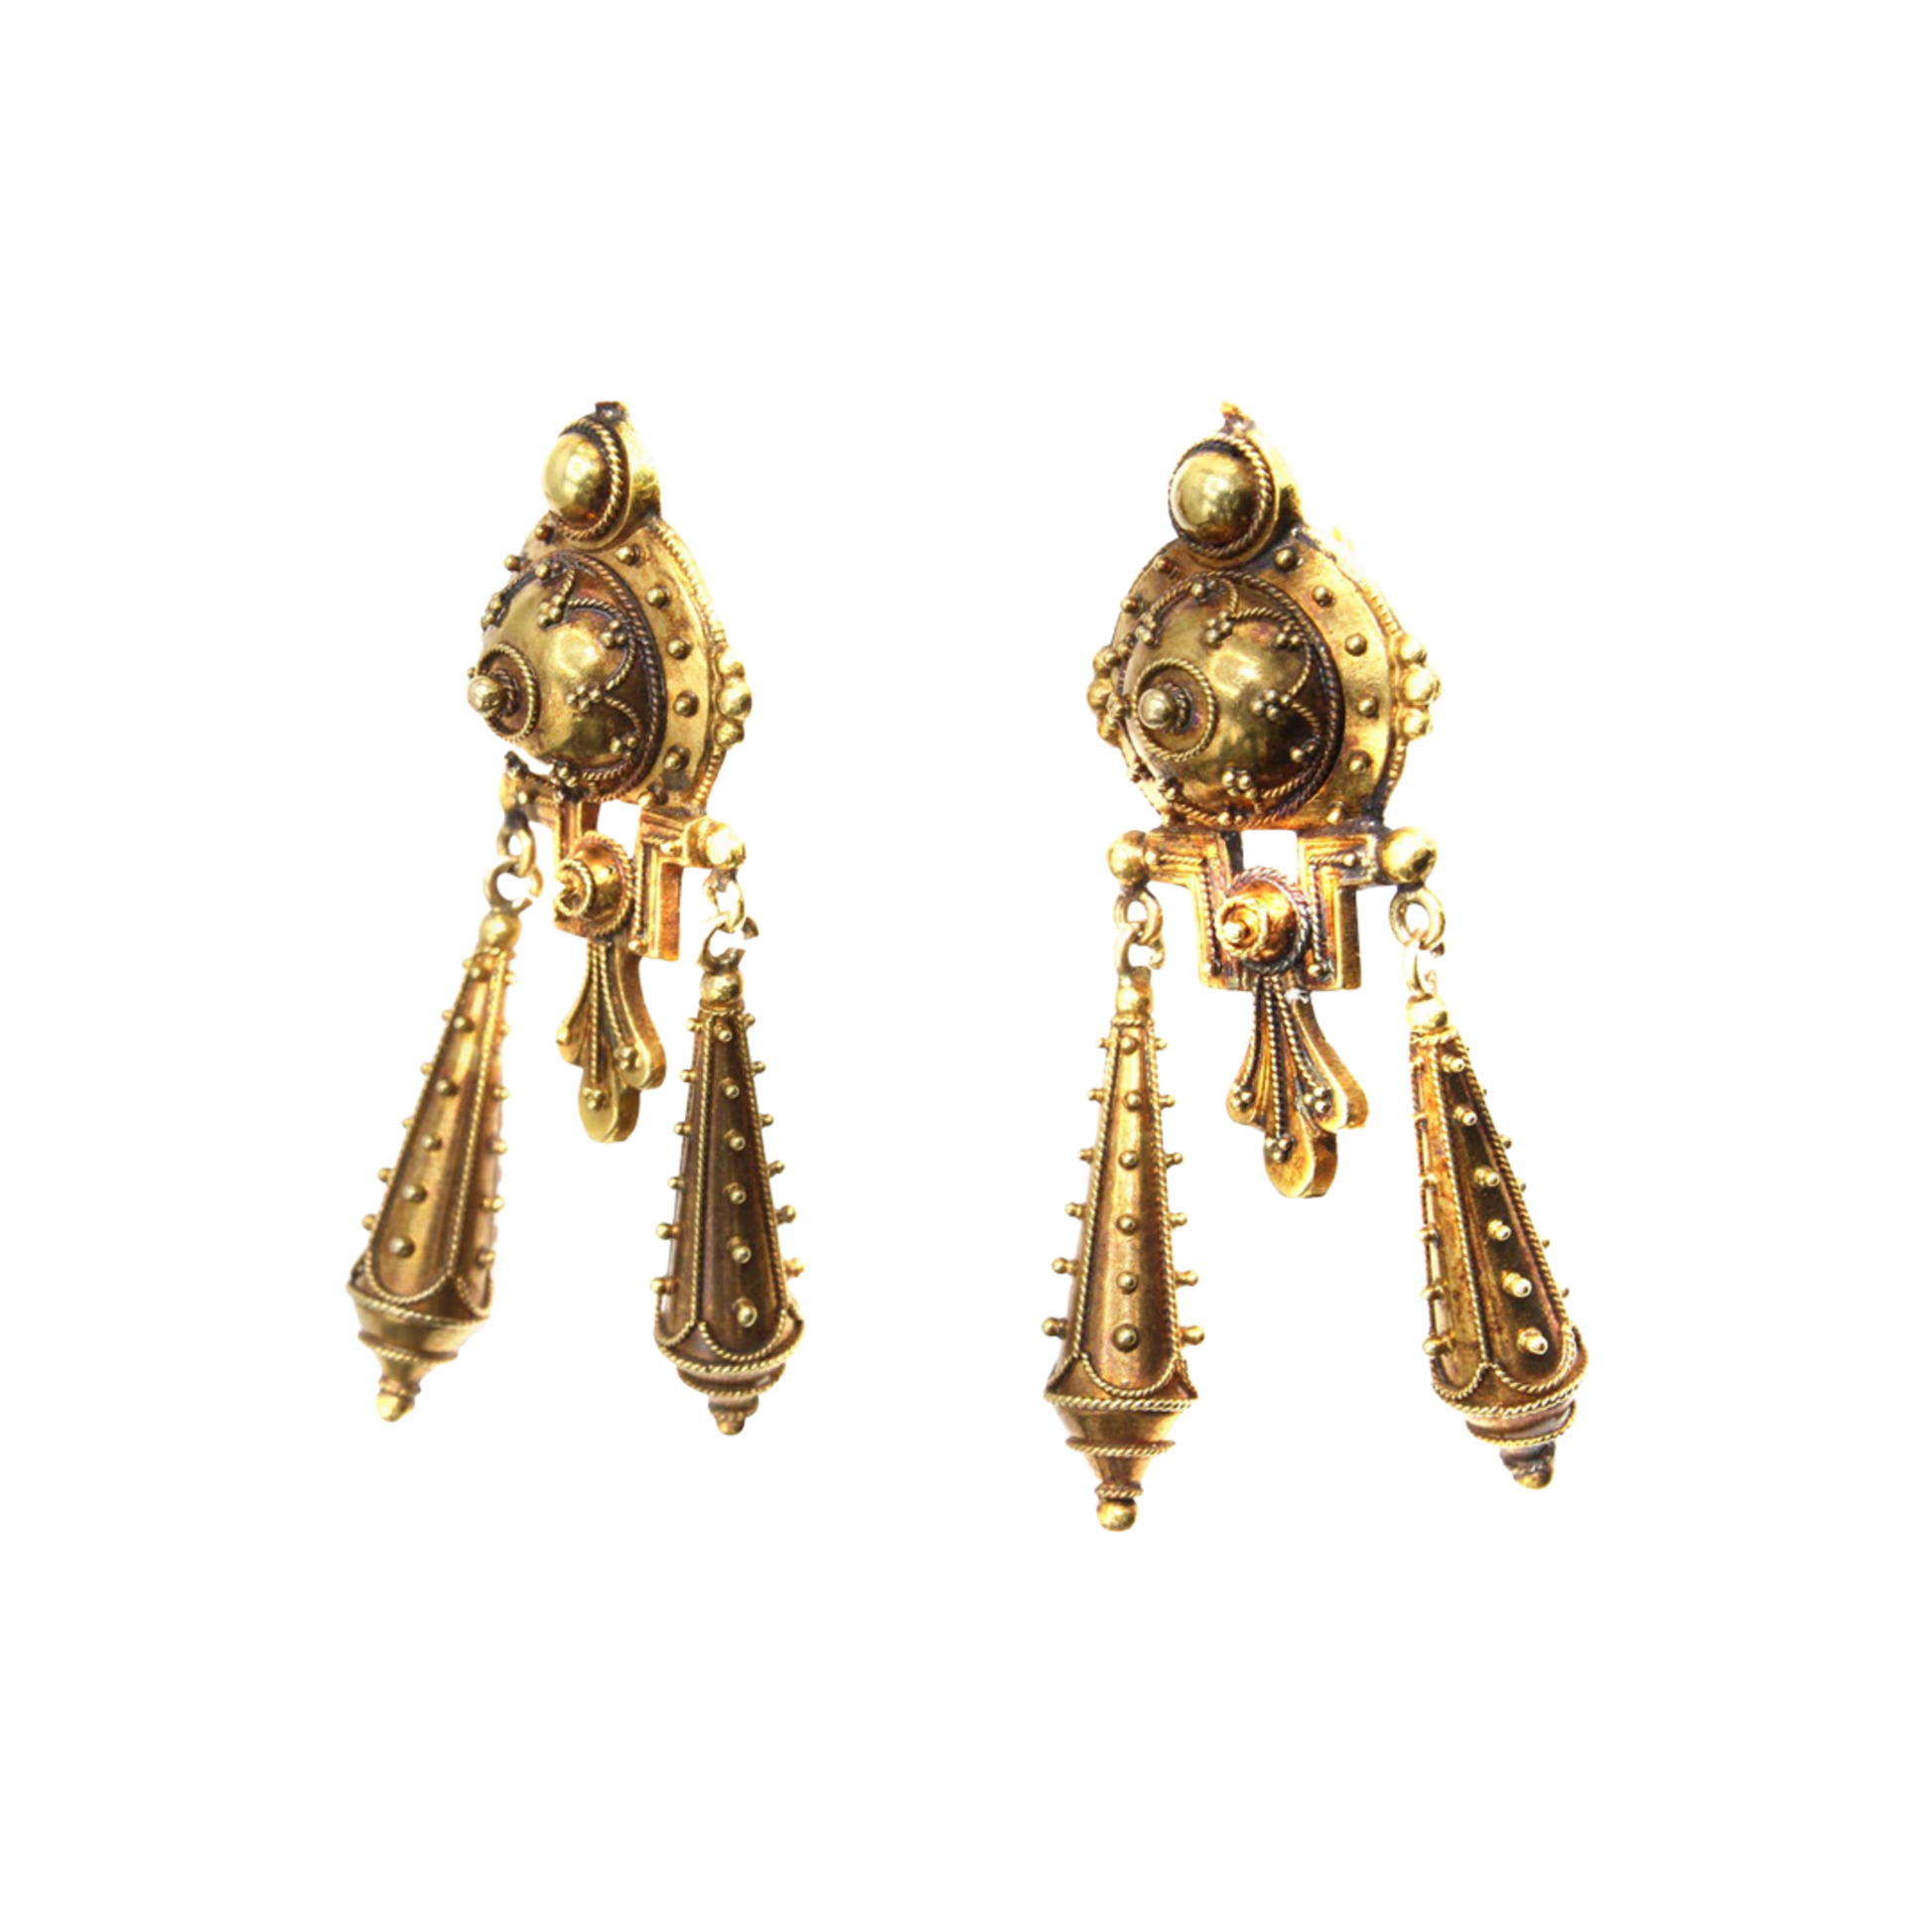 French Victorian Etruscan Revival 18KT Yellow Gold Earrings front